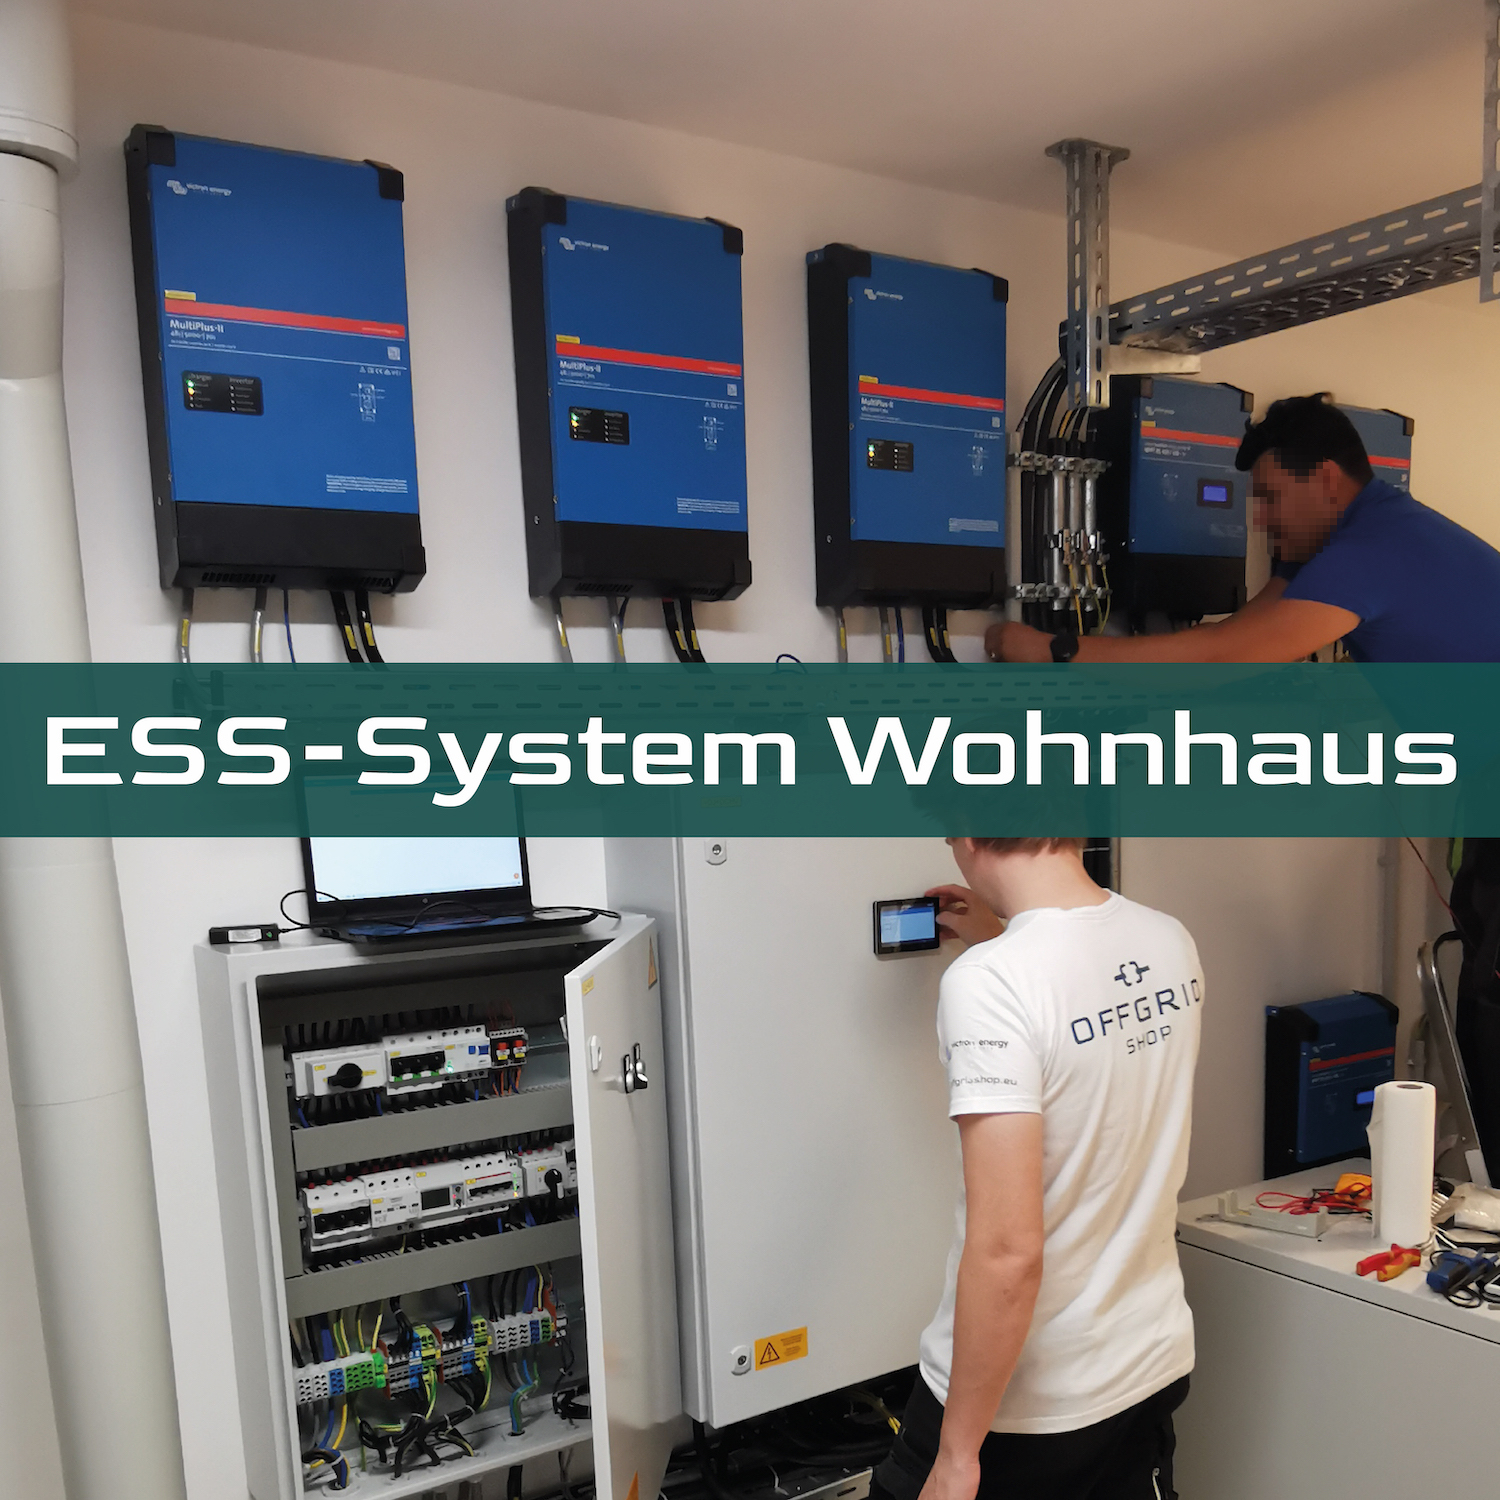 20kWh Victron Energy ESS-System Wohnhaus - OFFGRIDSHOP